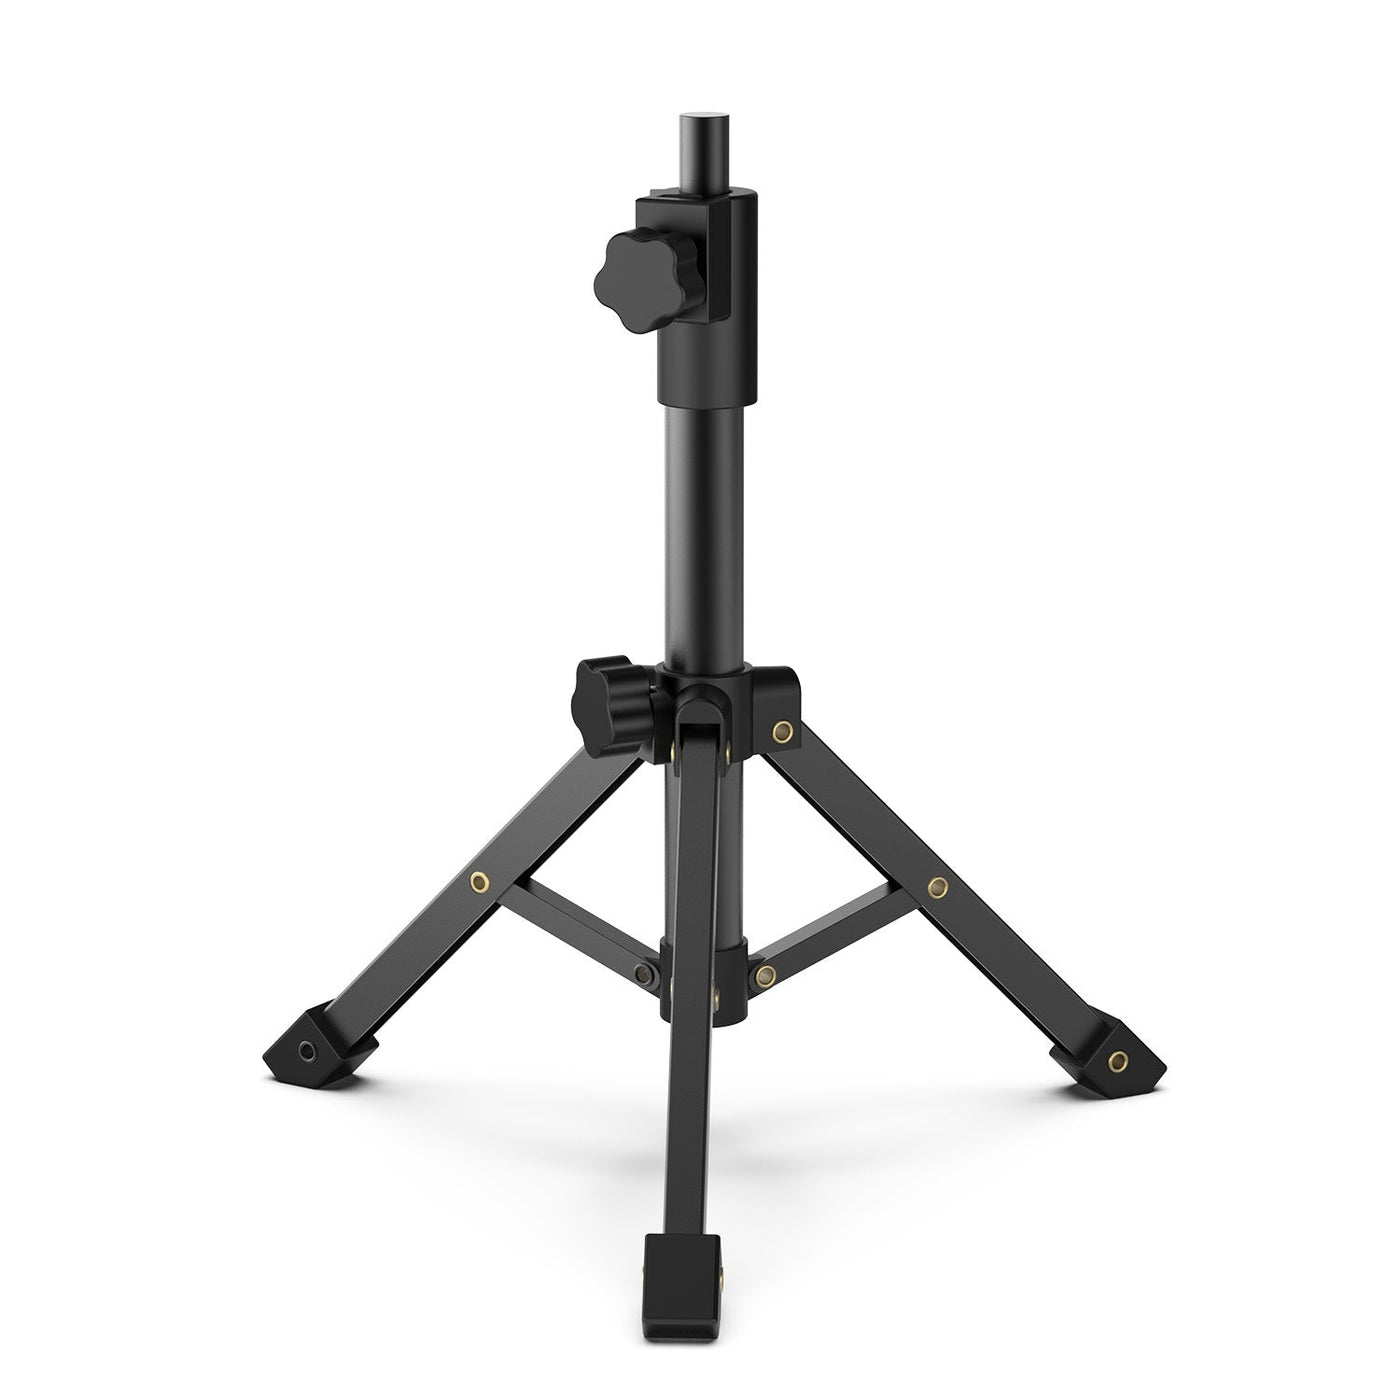 Sonitrek Height Adjustable Tripod for Podcasting Fits Most Standard Microphones by Mifo USA - The World's Most Advanced Wireless Earbuds for Active Movers - O5, O7